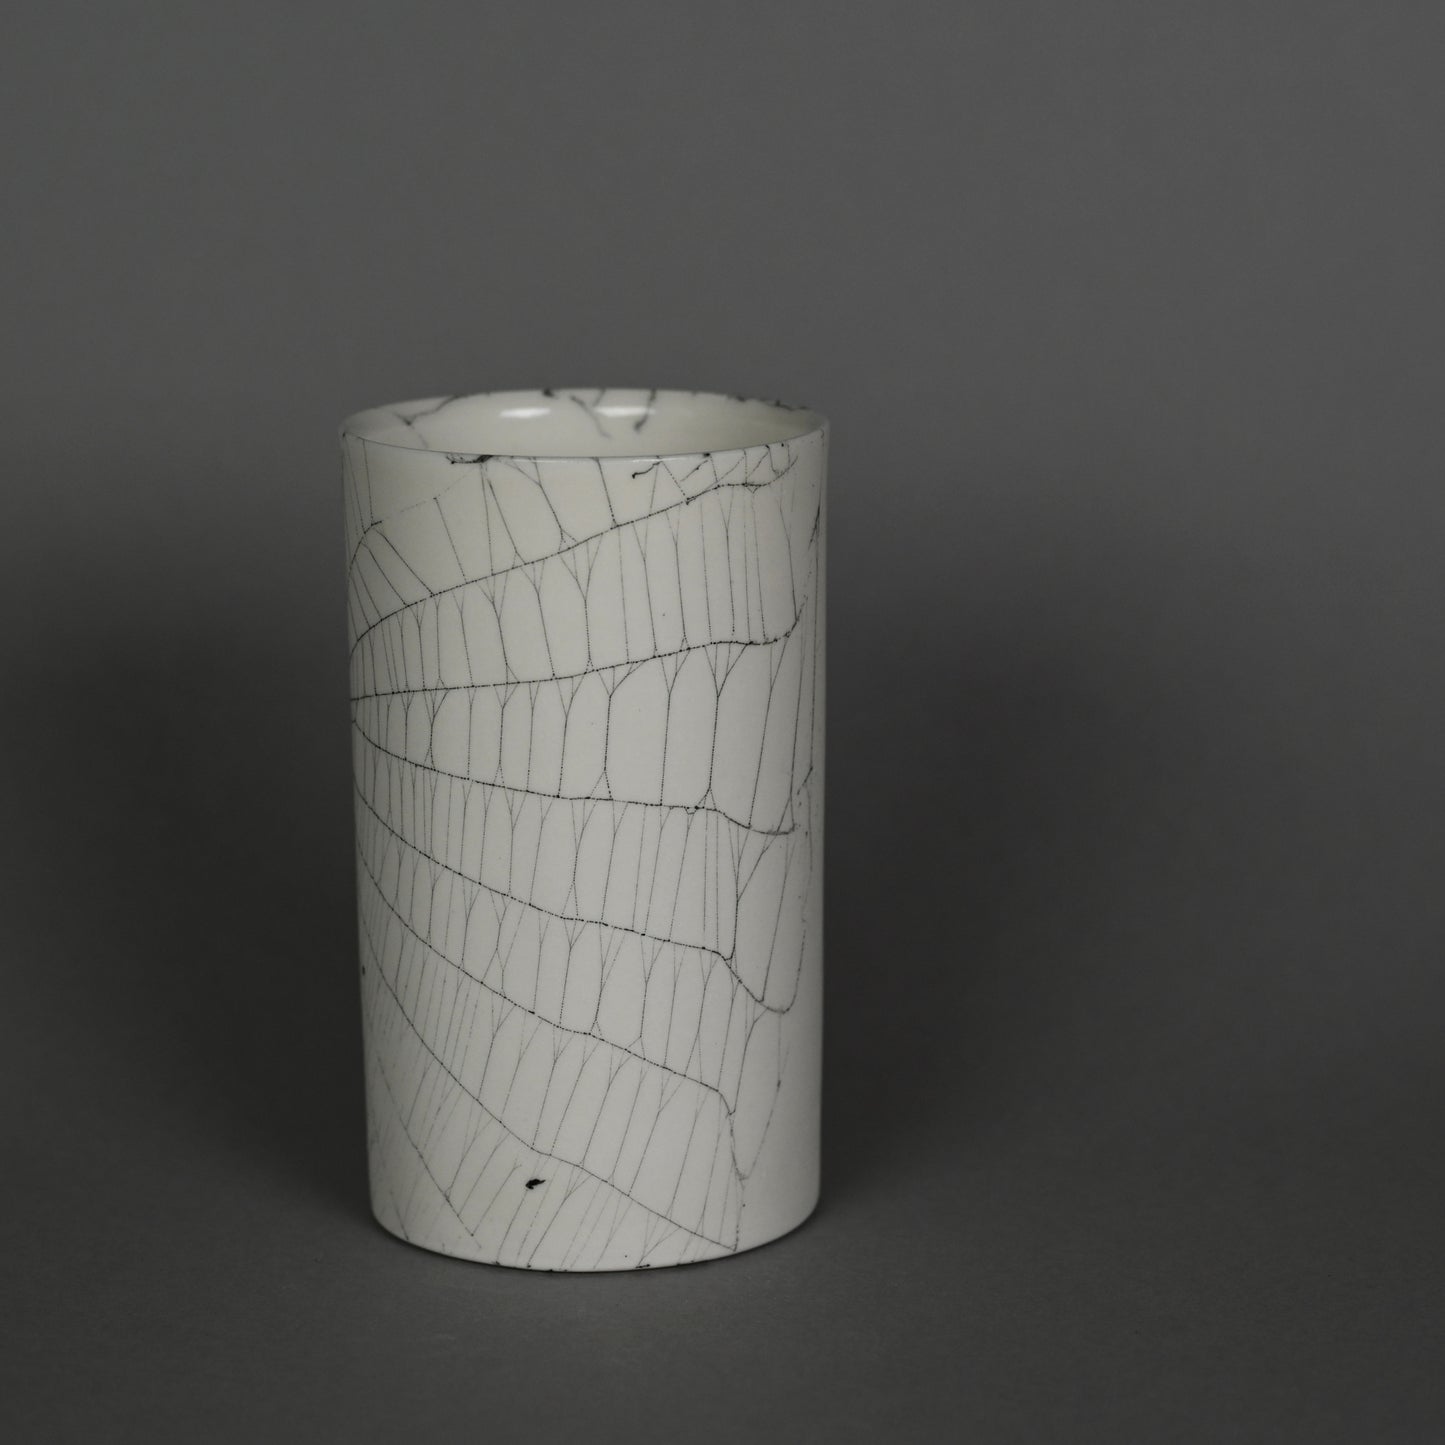 Web on Clay (203), Collected September 25, 2022